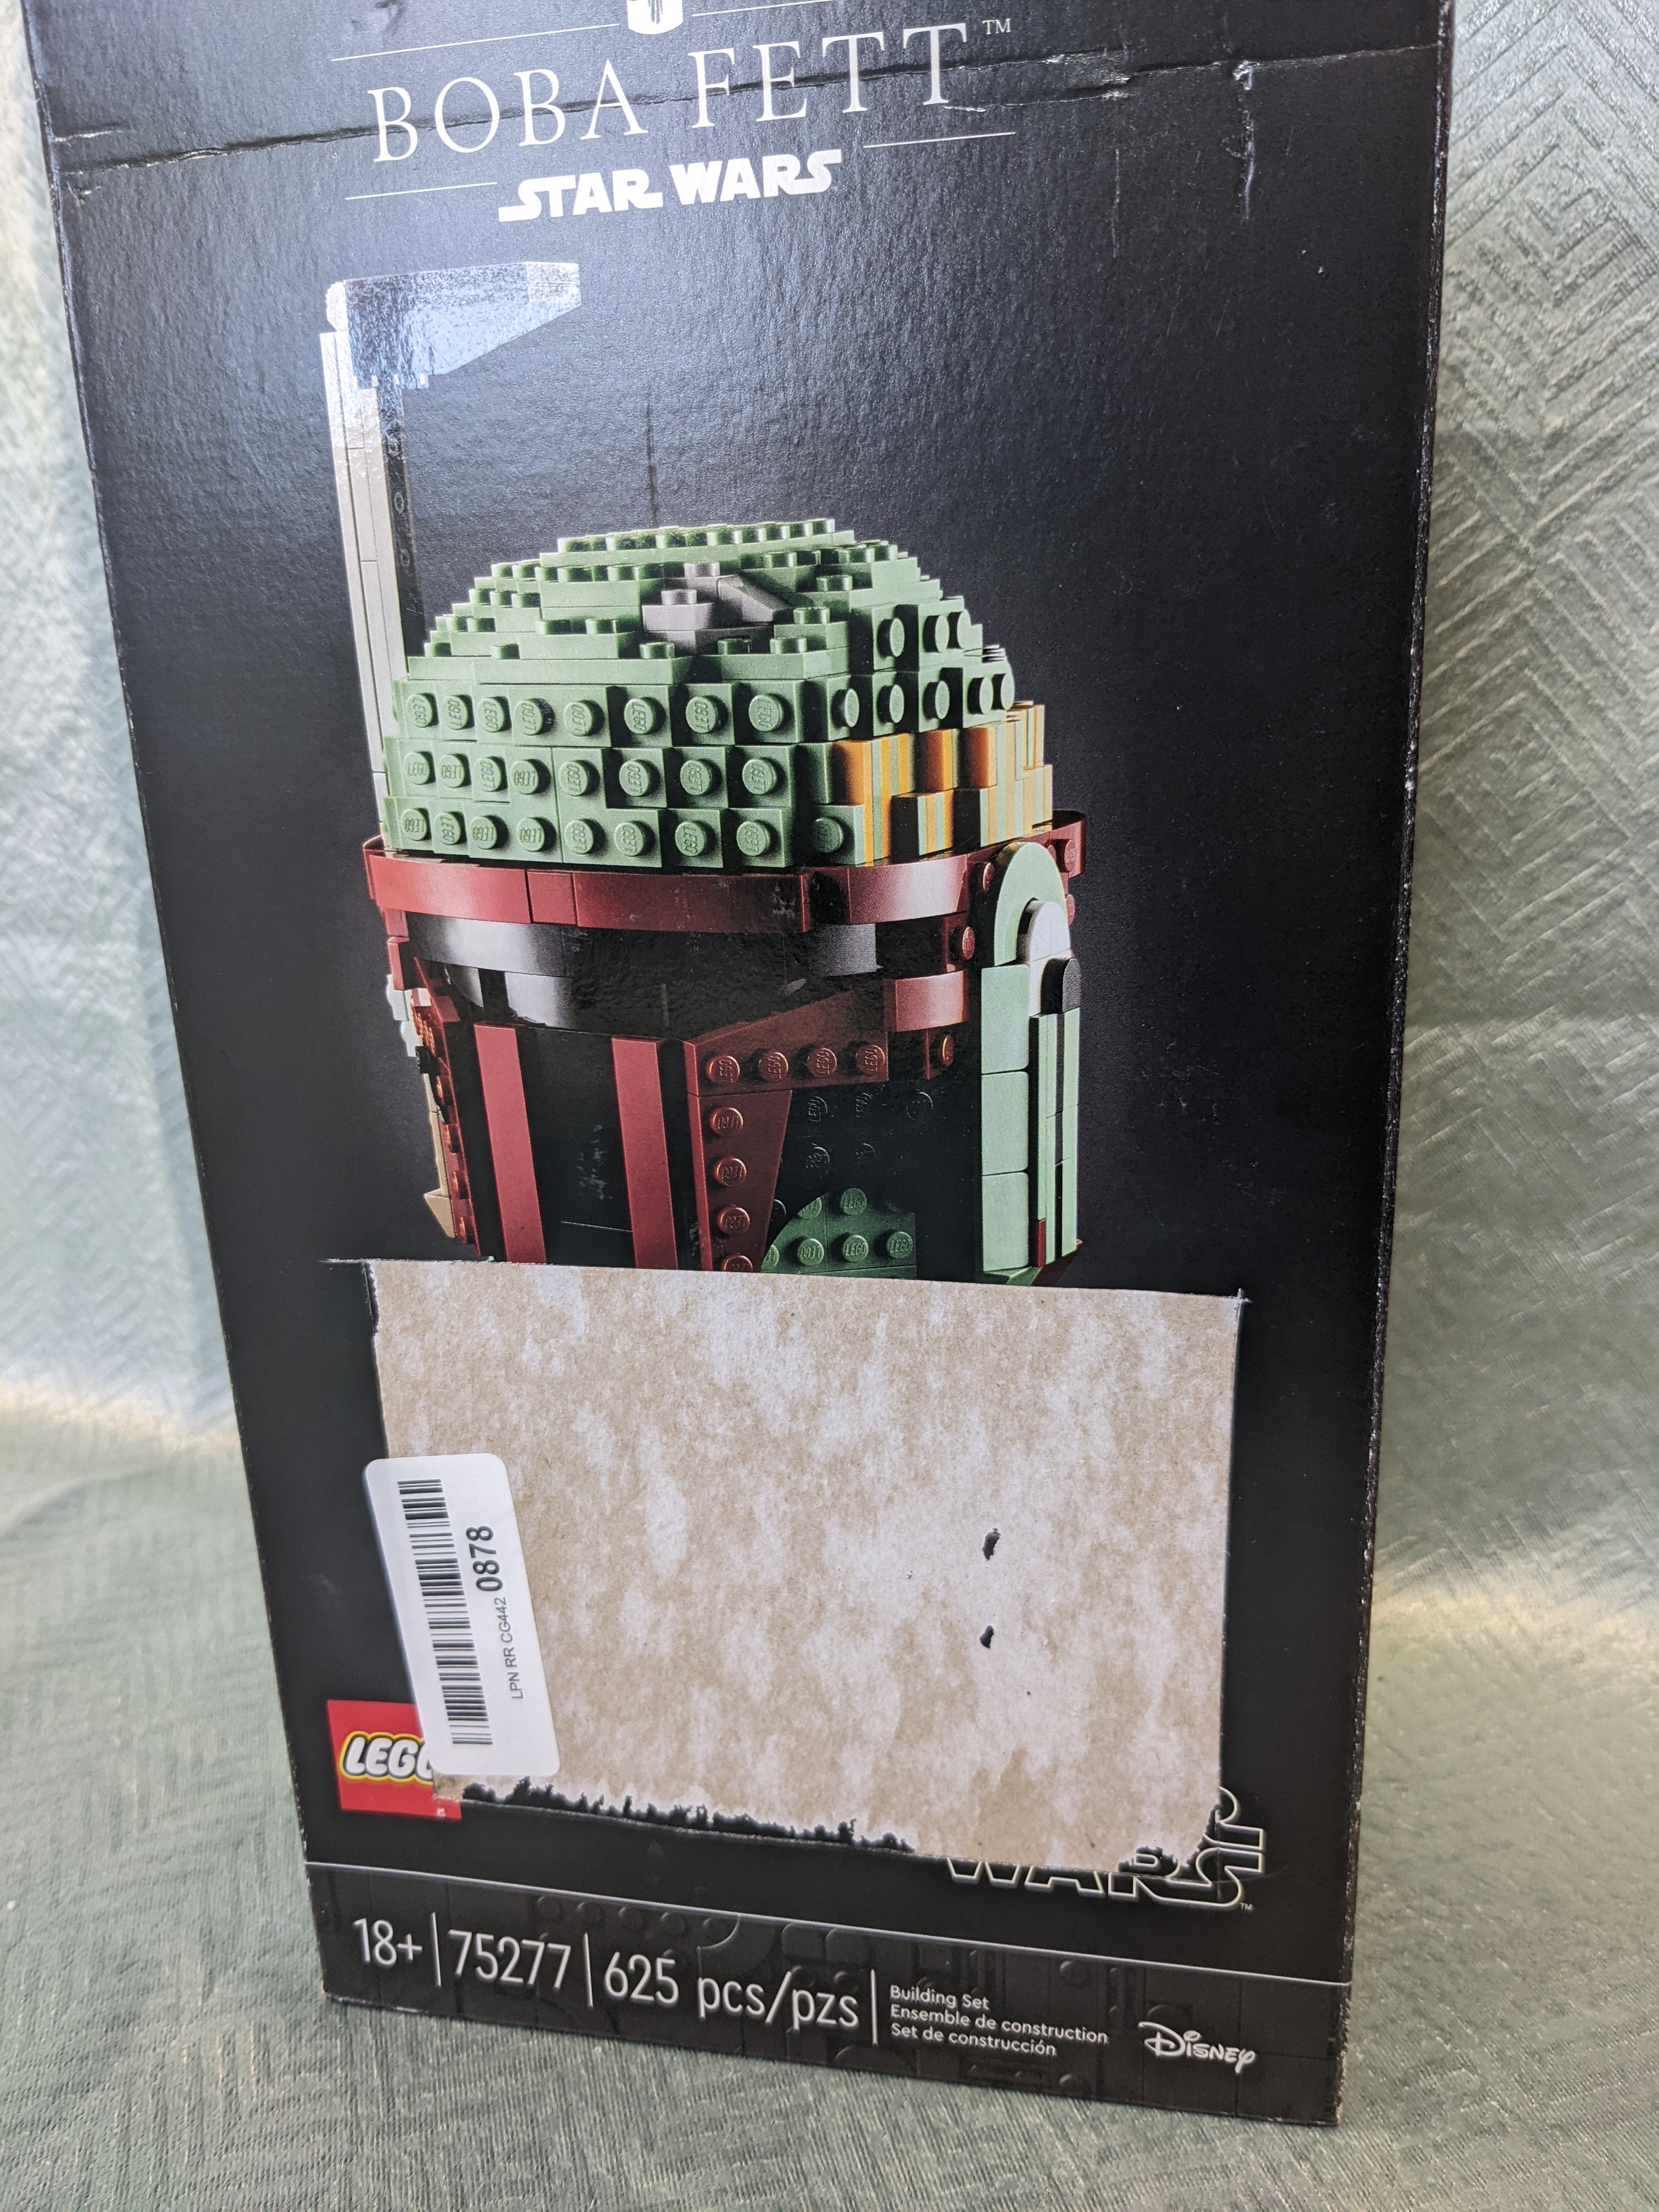 LEGO Star Wars Boba Fett Helmet 75277 Building Kit, Cool, Collectible Star Wars Character Building Set (625 Pieces) (7521981595886)